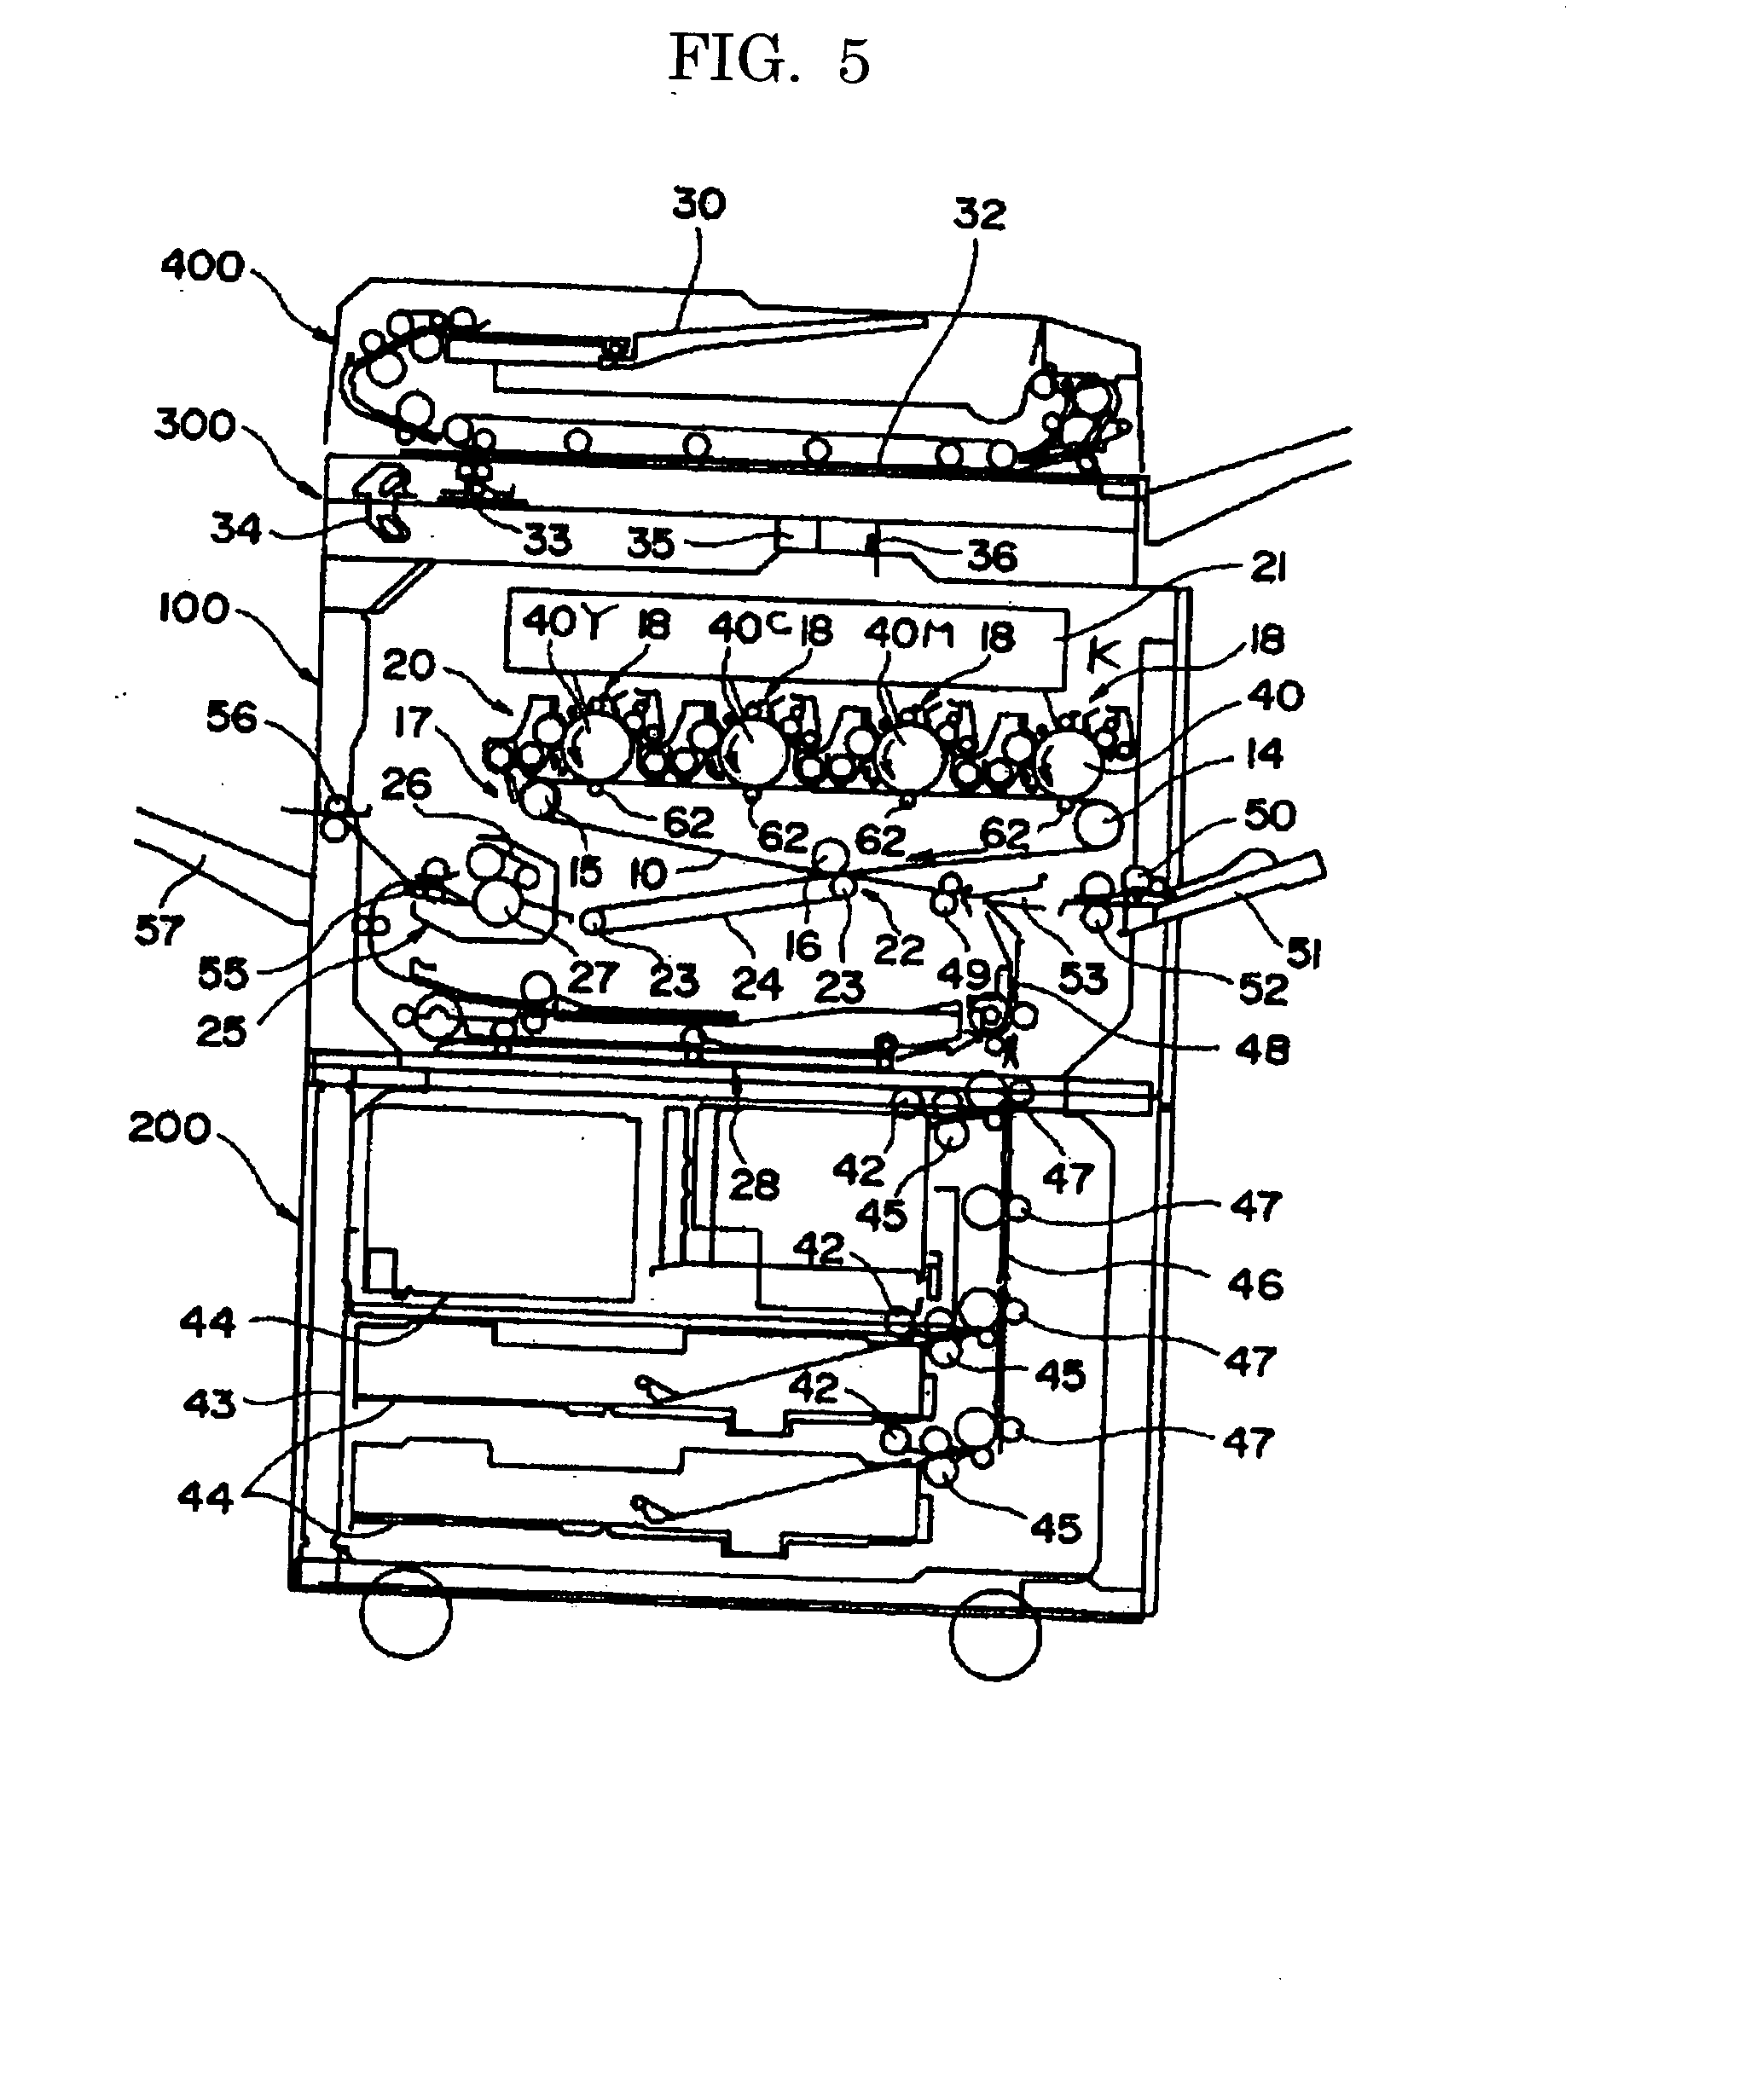 Toner, image forming apparatus, image forming method, process cartridge, and two-component developer